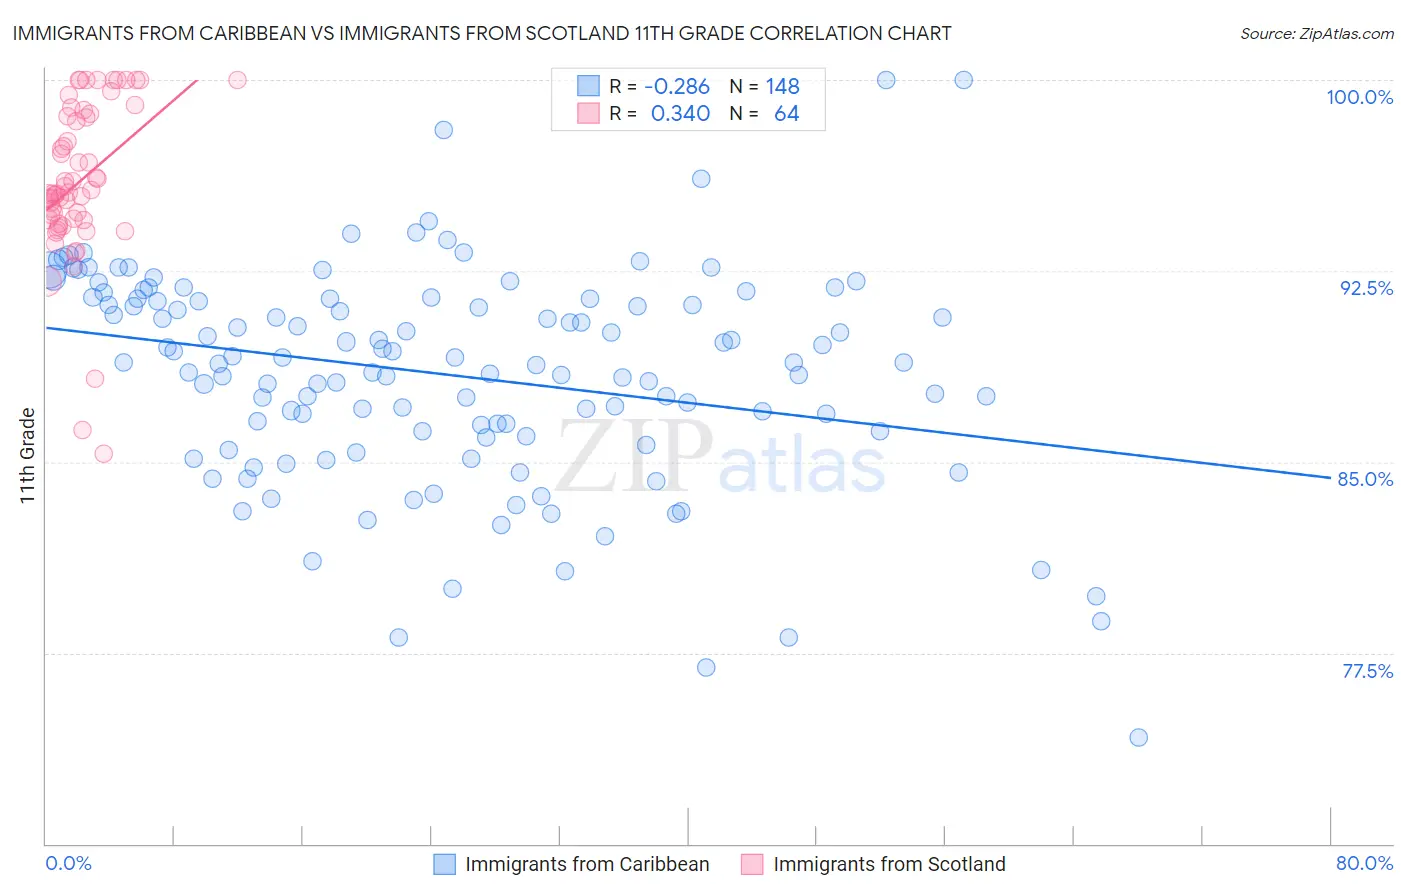 Immigrants from Caribbean vs Immigrants from Scotland 11th Grade